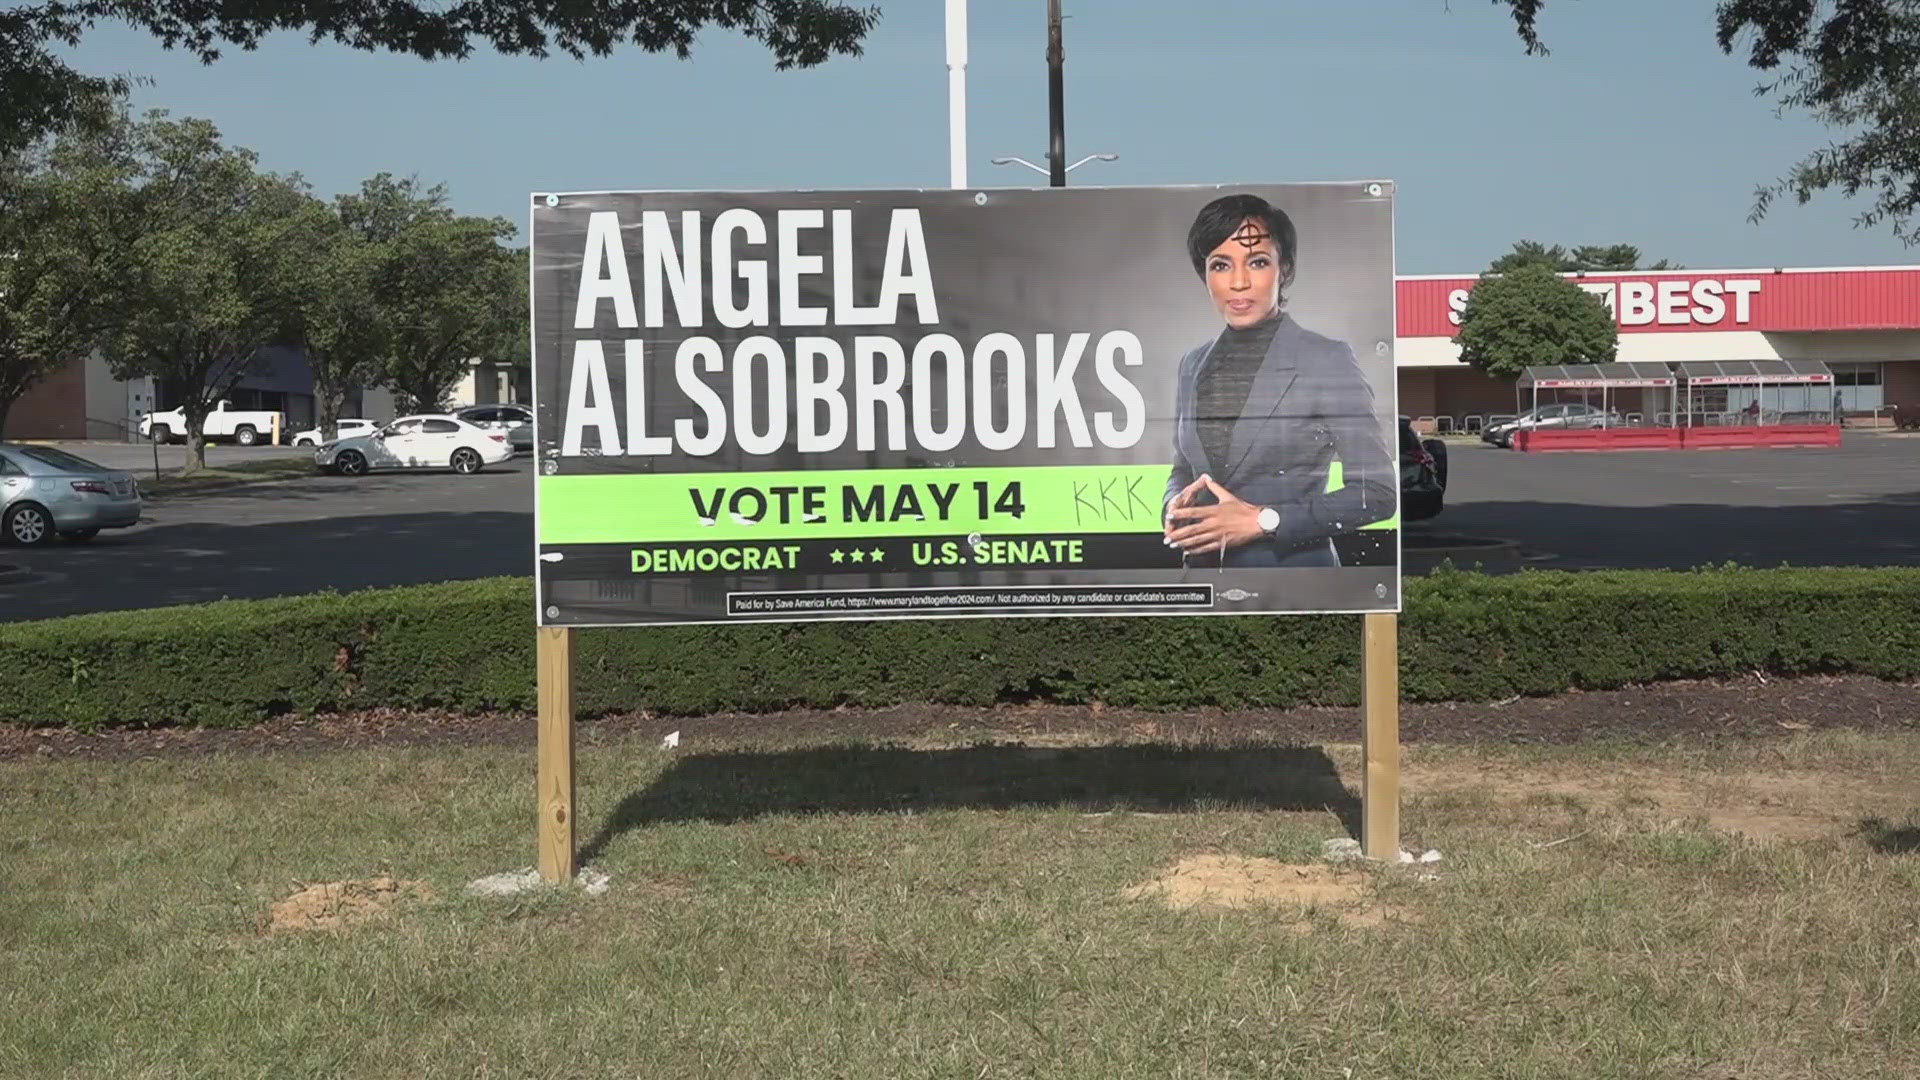 A campaign sign for Democratic Senate nominee Angela Alsobrooks was vandalized with threatening and hateful messages in Prince George's County.